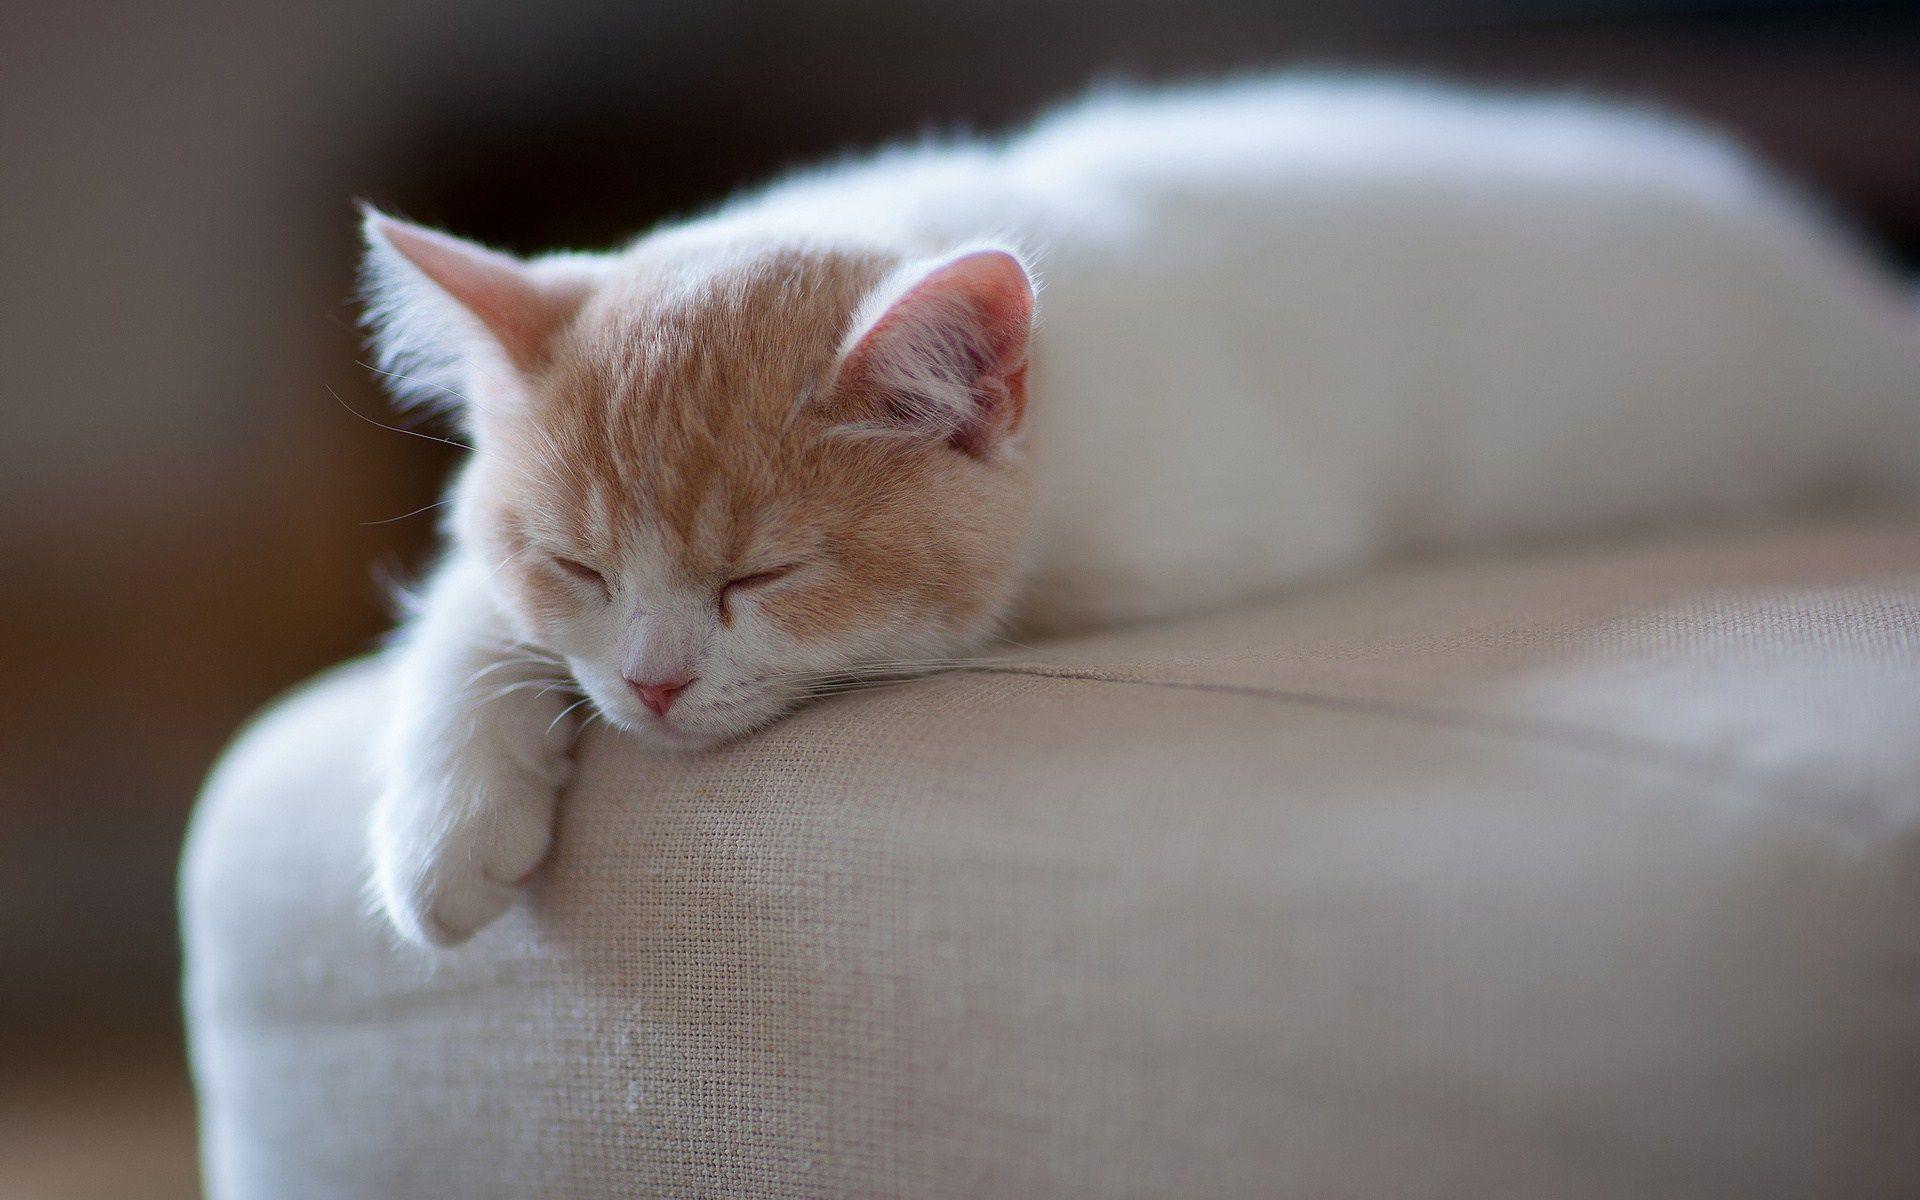 White Cat Sleeping On Sofa HD Wallpaper. Cat sleeping, Cat facts, Cats and kittens